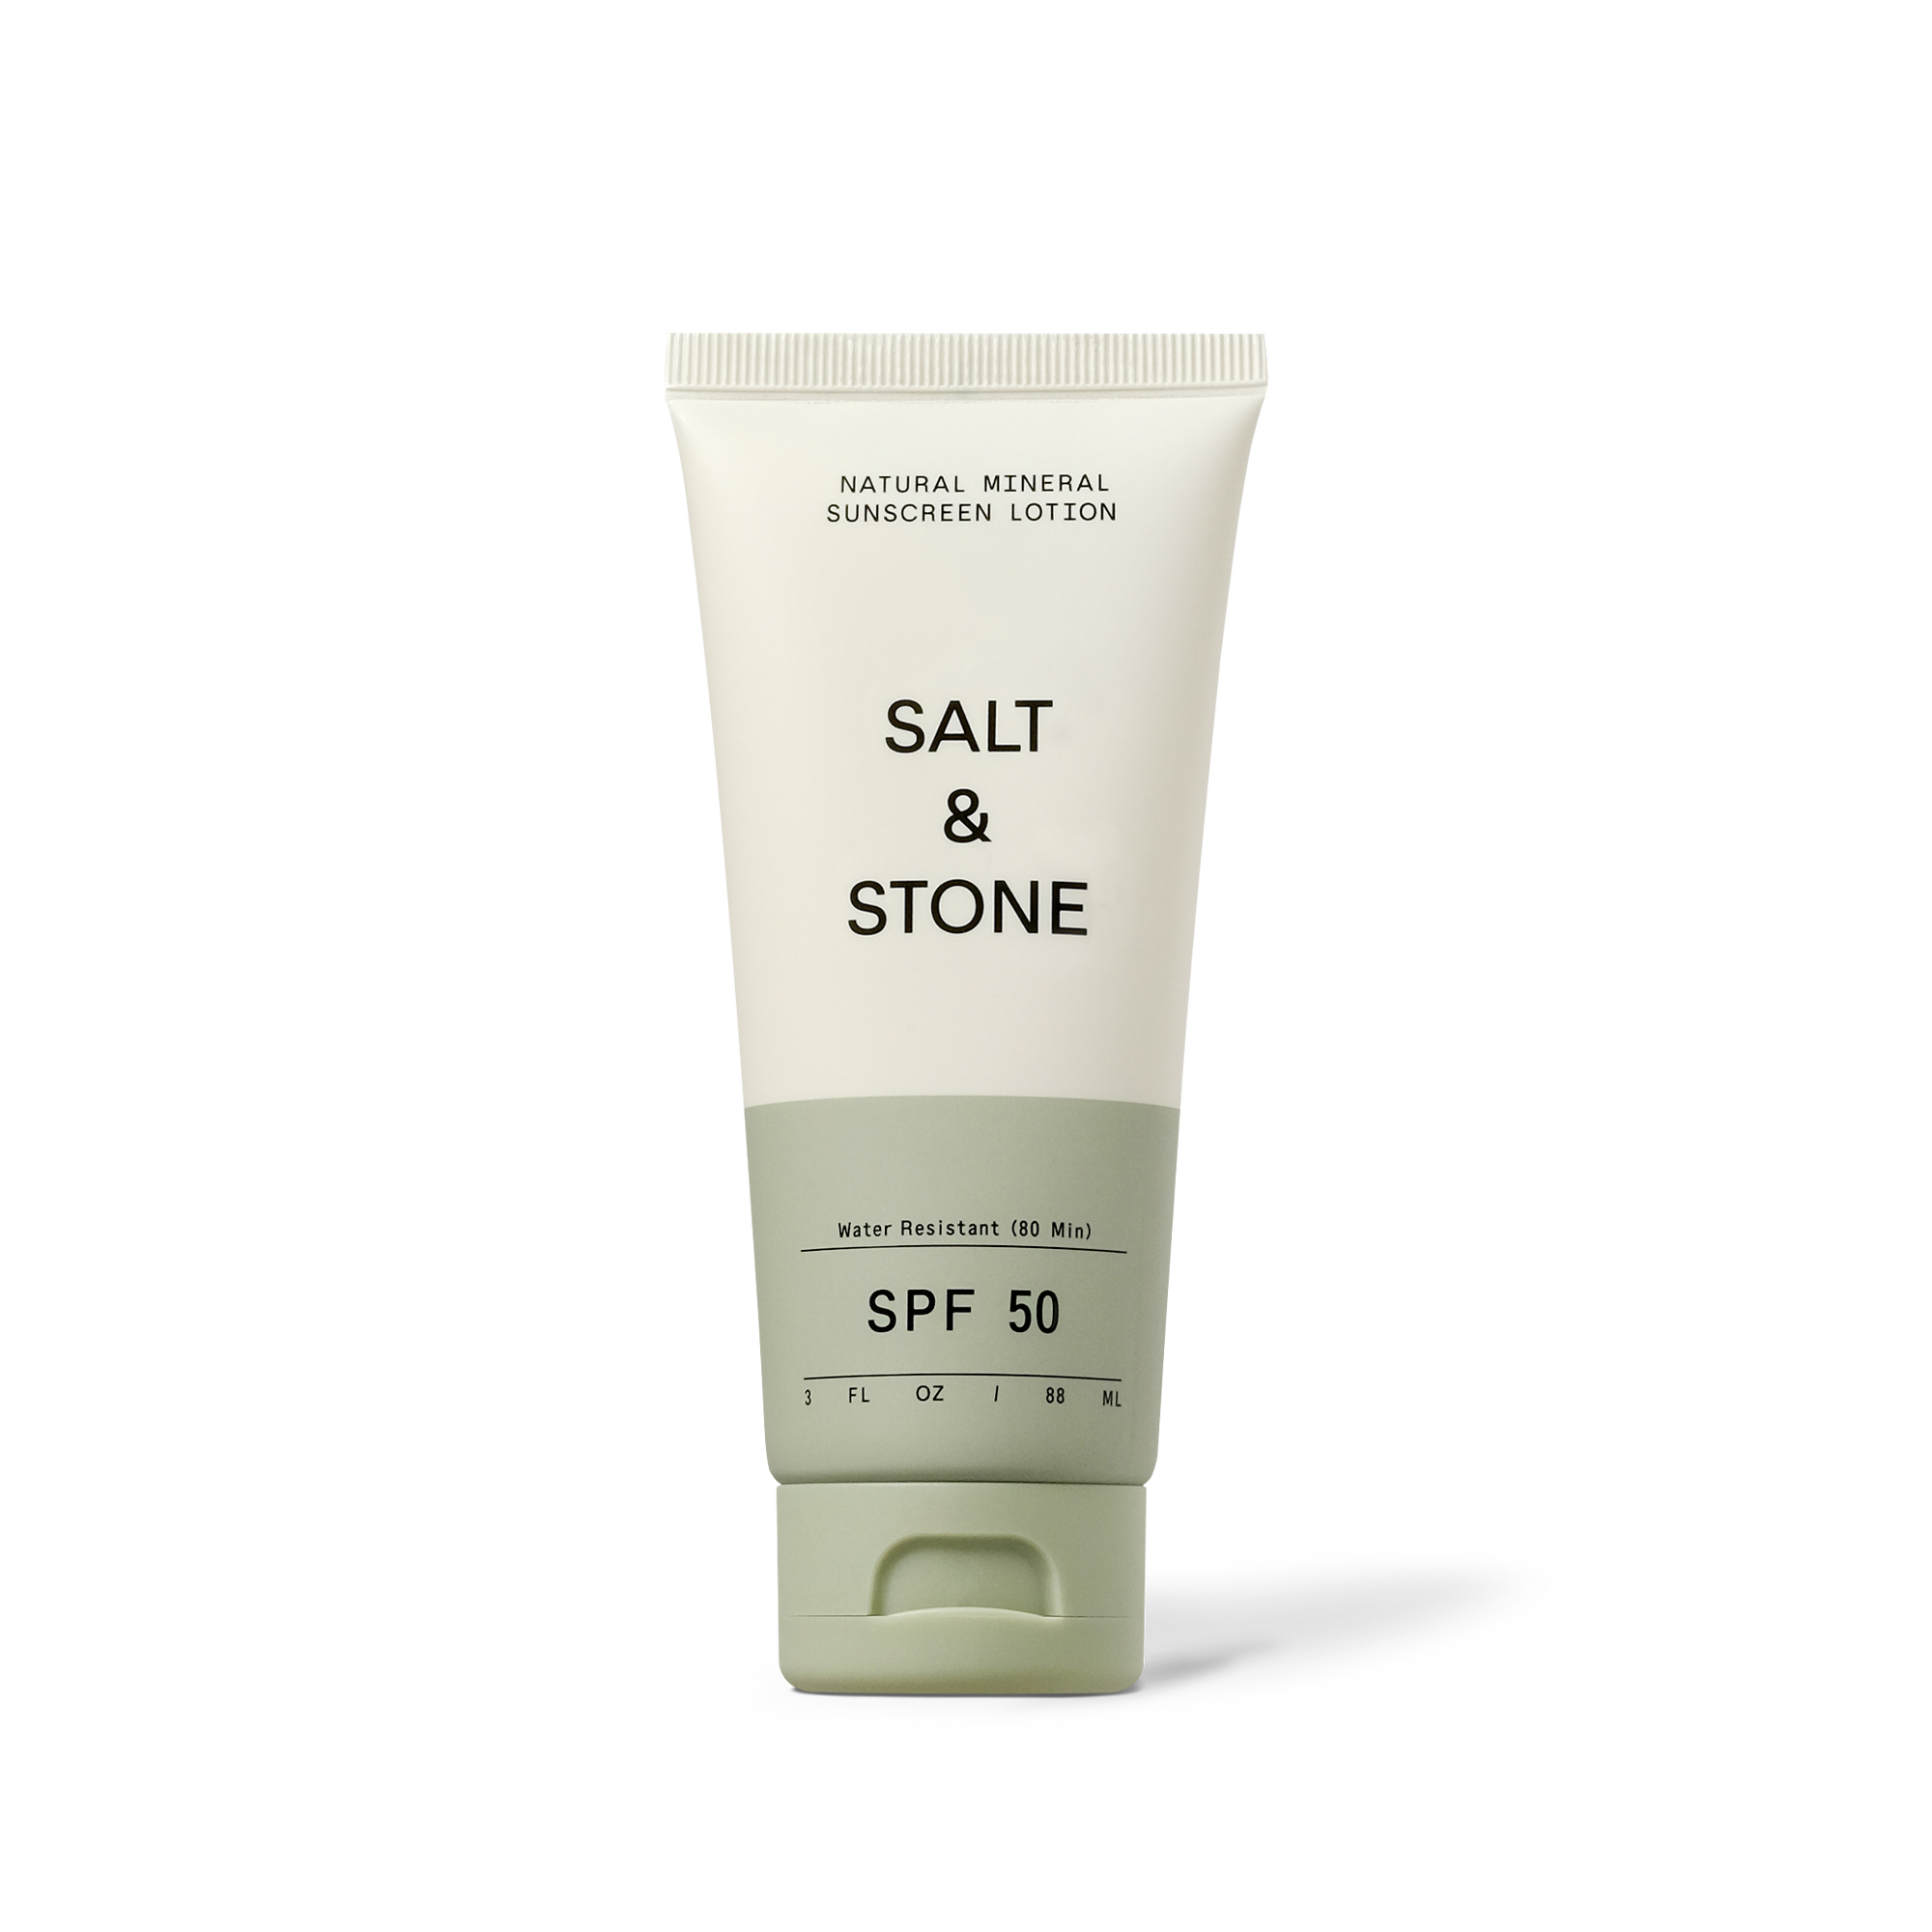 Salt & Stone SPF 50 Natural Mineral Sunscreen Lotion